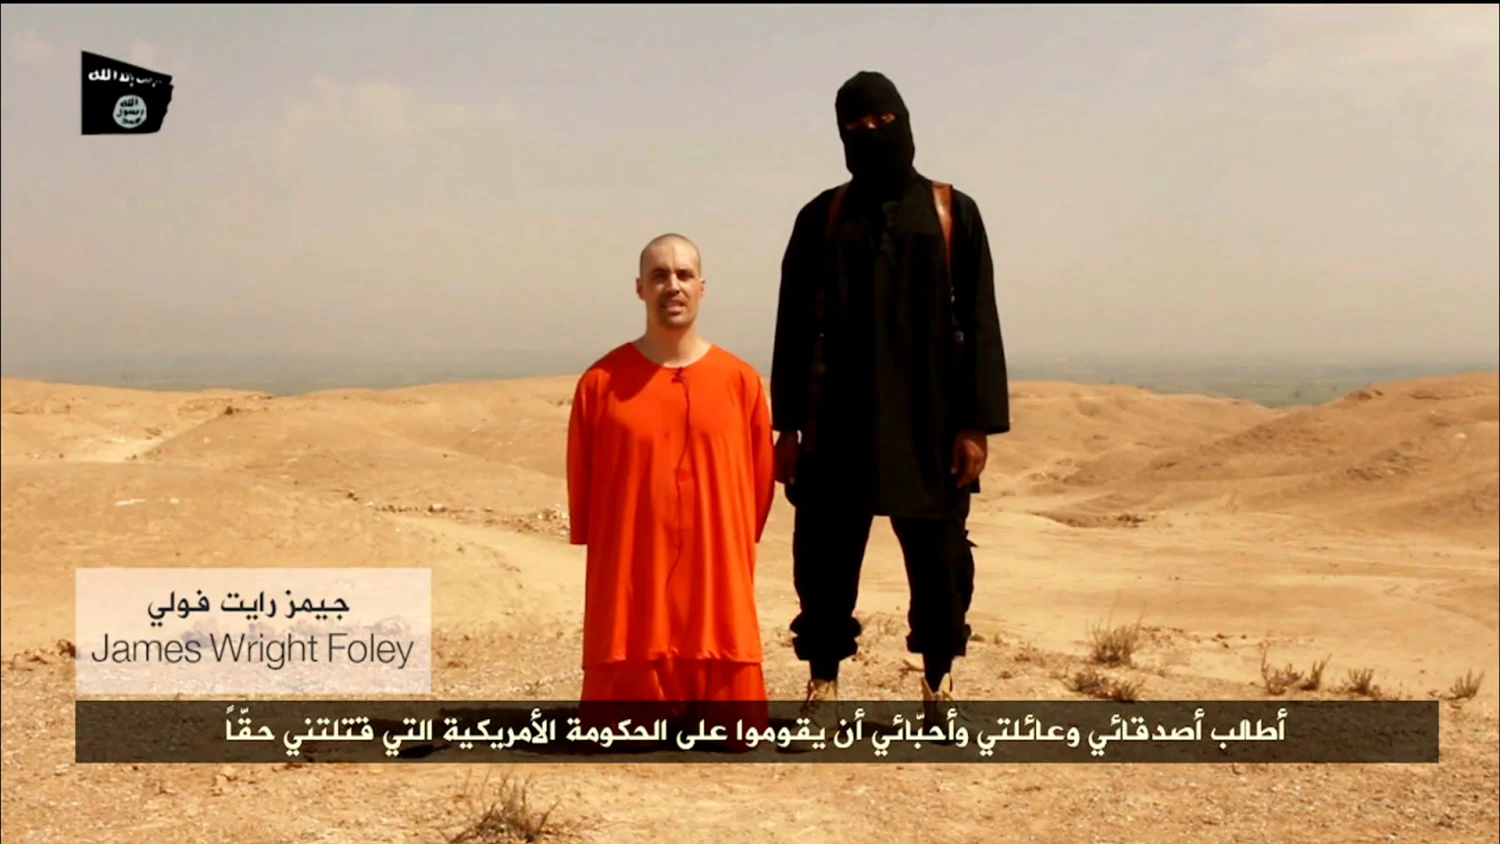 The Role of UK Intelligence Services in the Abduction, Murder of James Foley